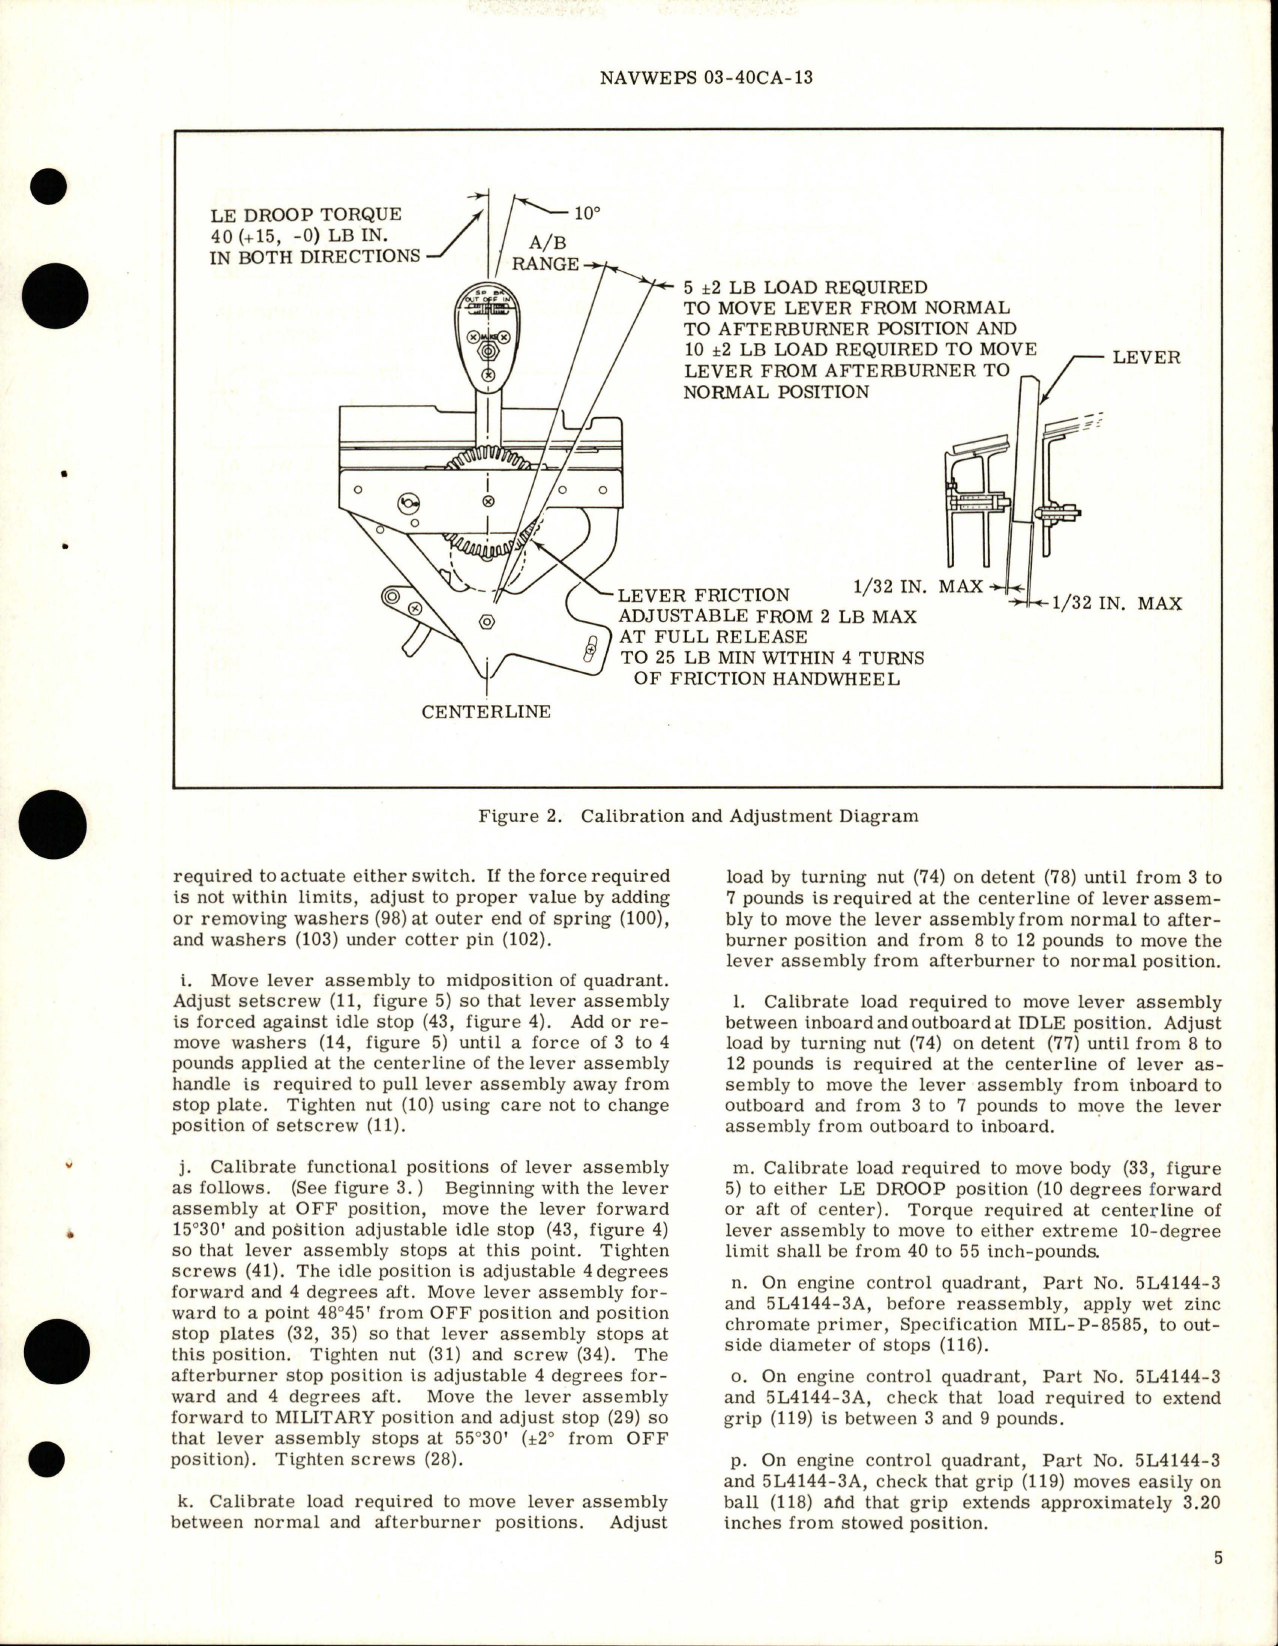 Sample page 7 from AirCorps Library document: Overhaul Instructions with Parts Breakdown for Engine Control Quadrant - Parts 5L4144, 5L4144-1, 5L4144-3, and 5L4144-3A 